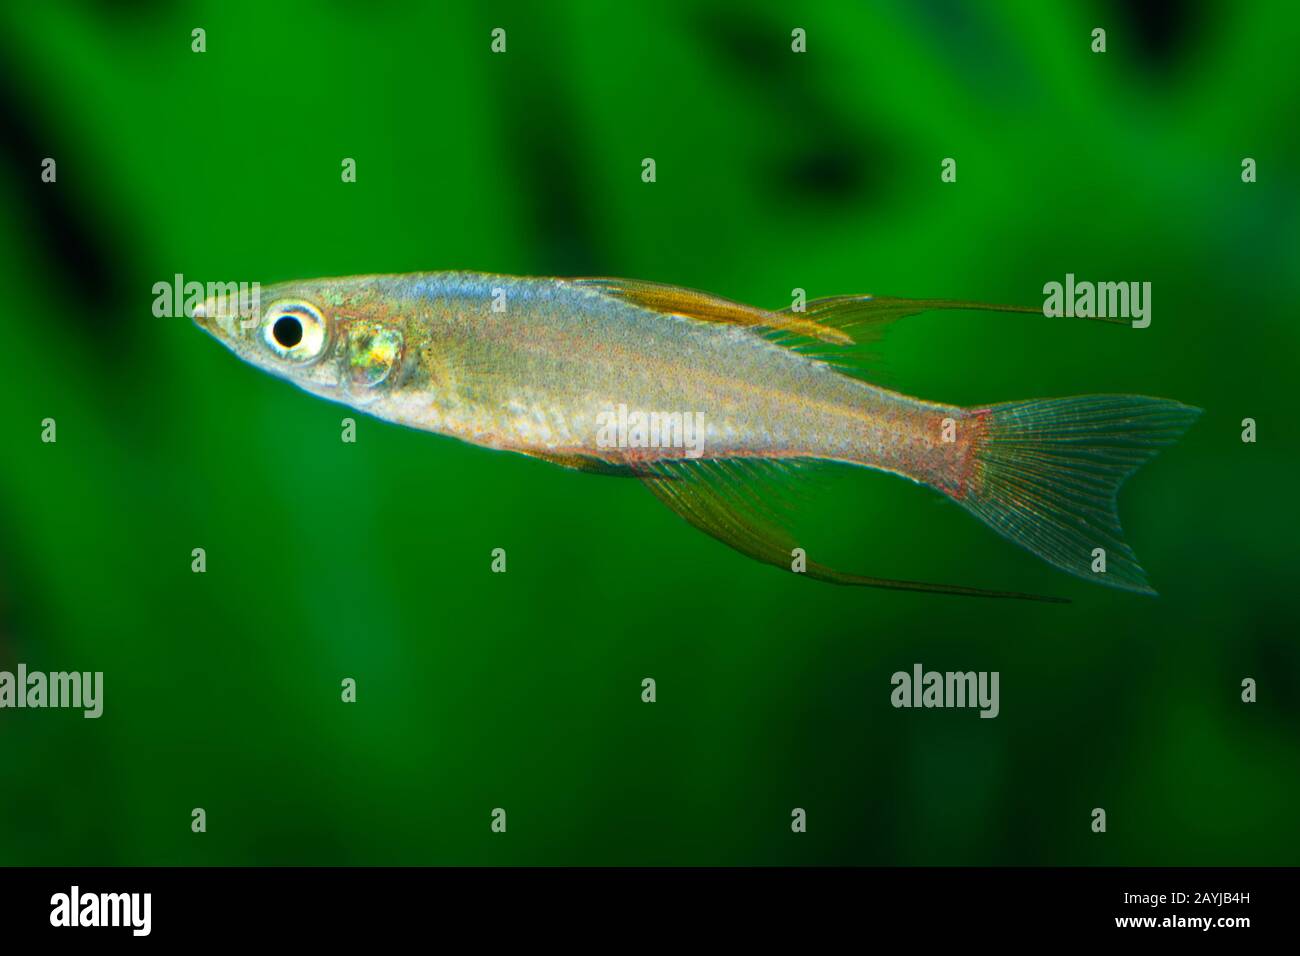 Threadfin rainbow, Threadfin rainbowfish, Threadfin, Featherfin Rainbowfish, New Guinea Rainbow (Iriatherina werneri), side view Stock Photo